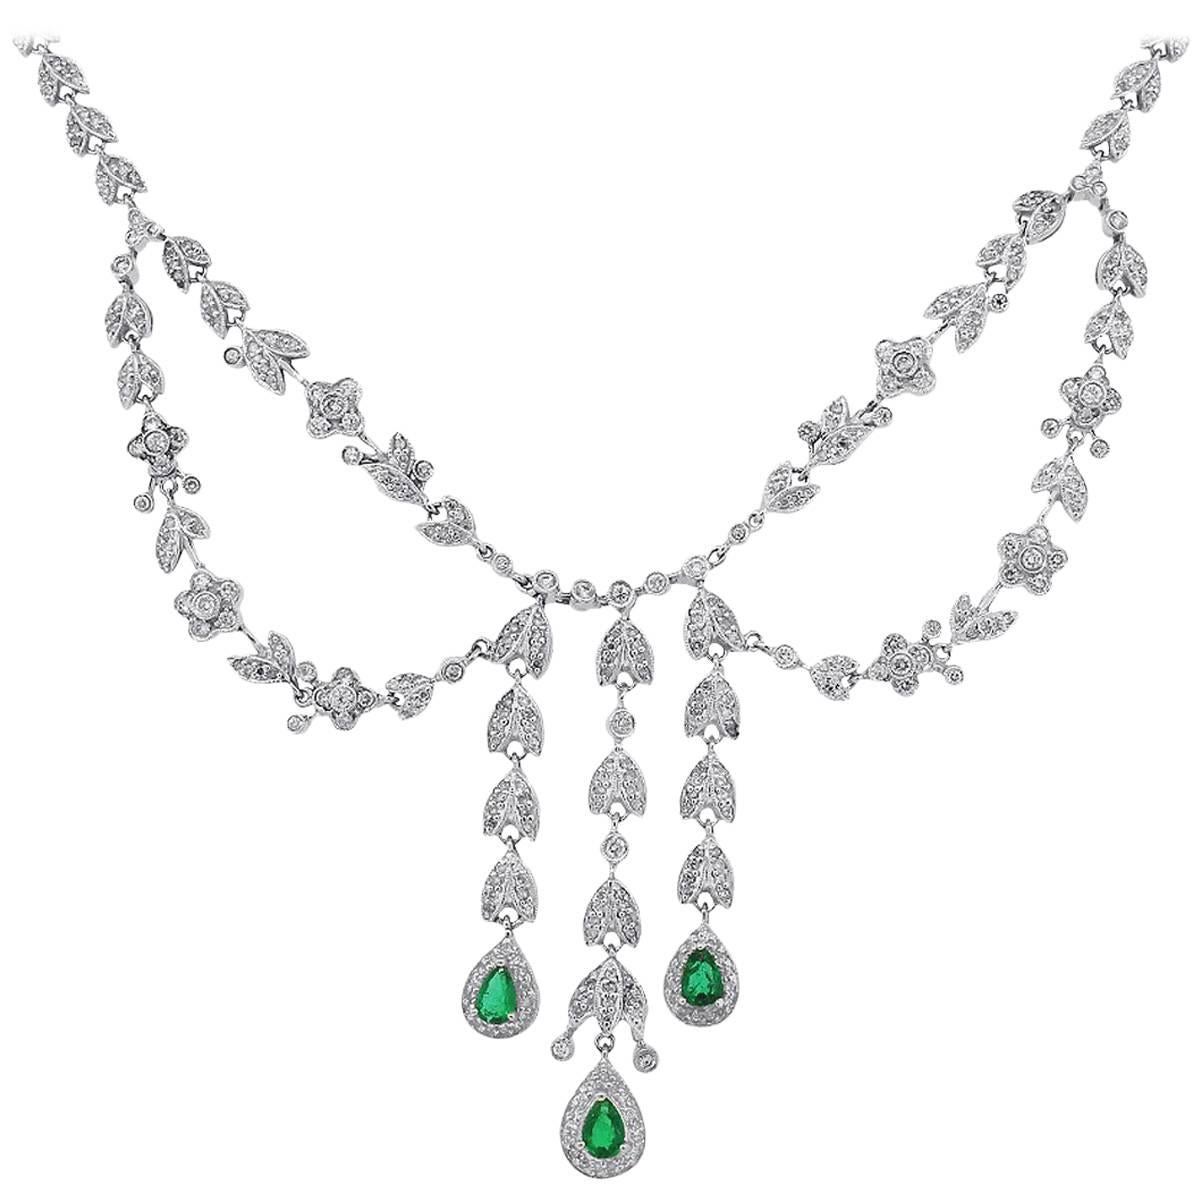 Diamond and Emerald Chandelier Necklace